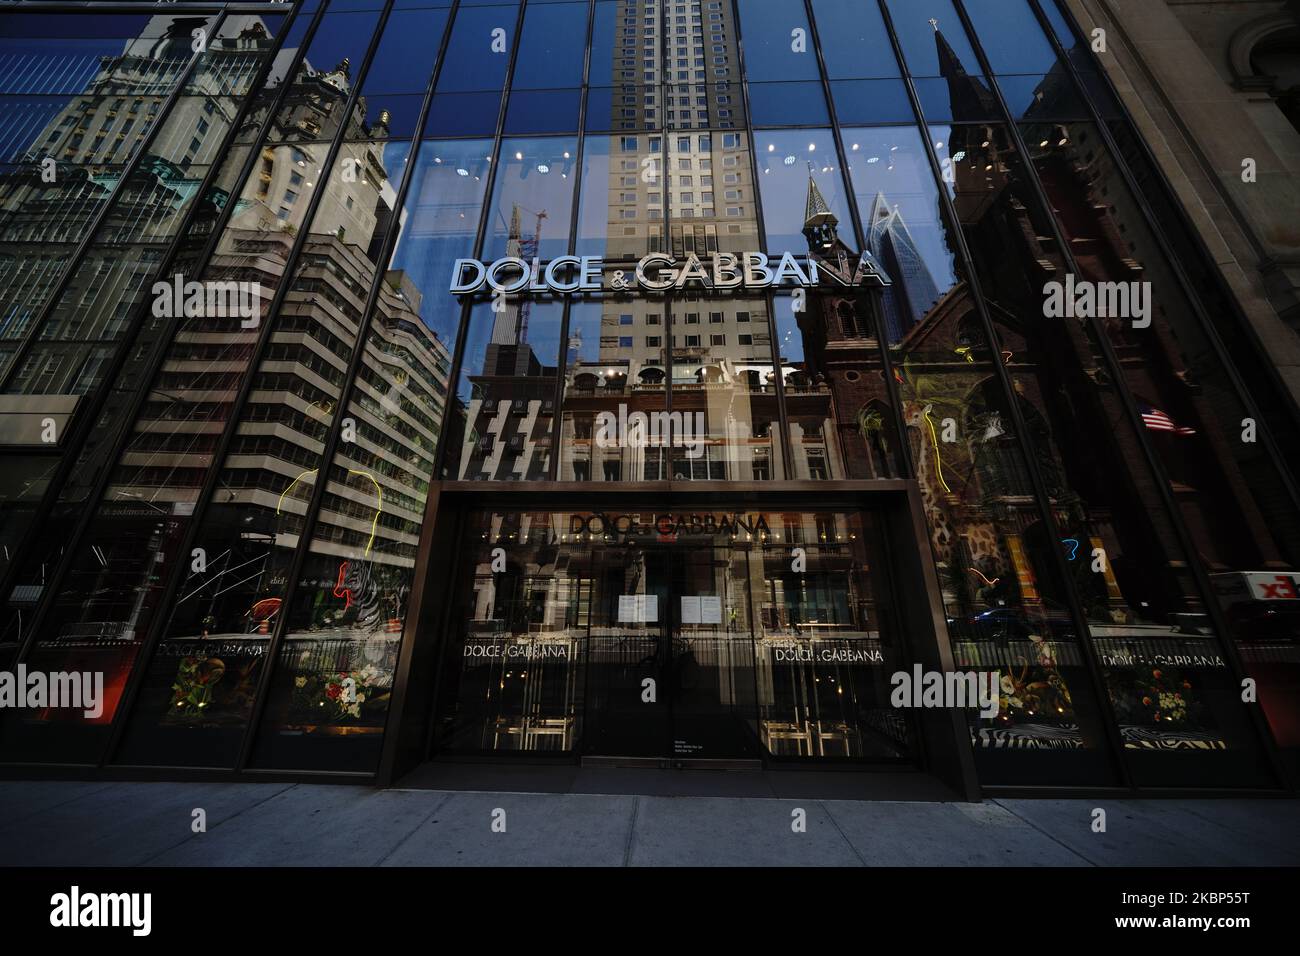 A view of Dolce & Gabbana Boutique during the coronavirus pandemic on May 20, 2020 in 5th Ave., New York City. COVID-19 has spread to most countries around the world, claiming over 316,000 lives with over 4.8 million infections reported. (Photo by John Nacion/NurPhoto) Stock Photo